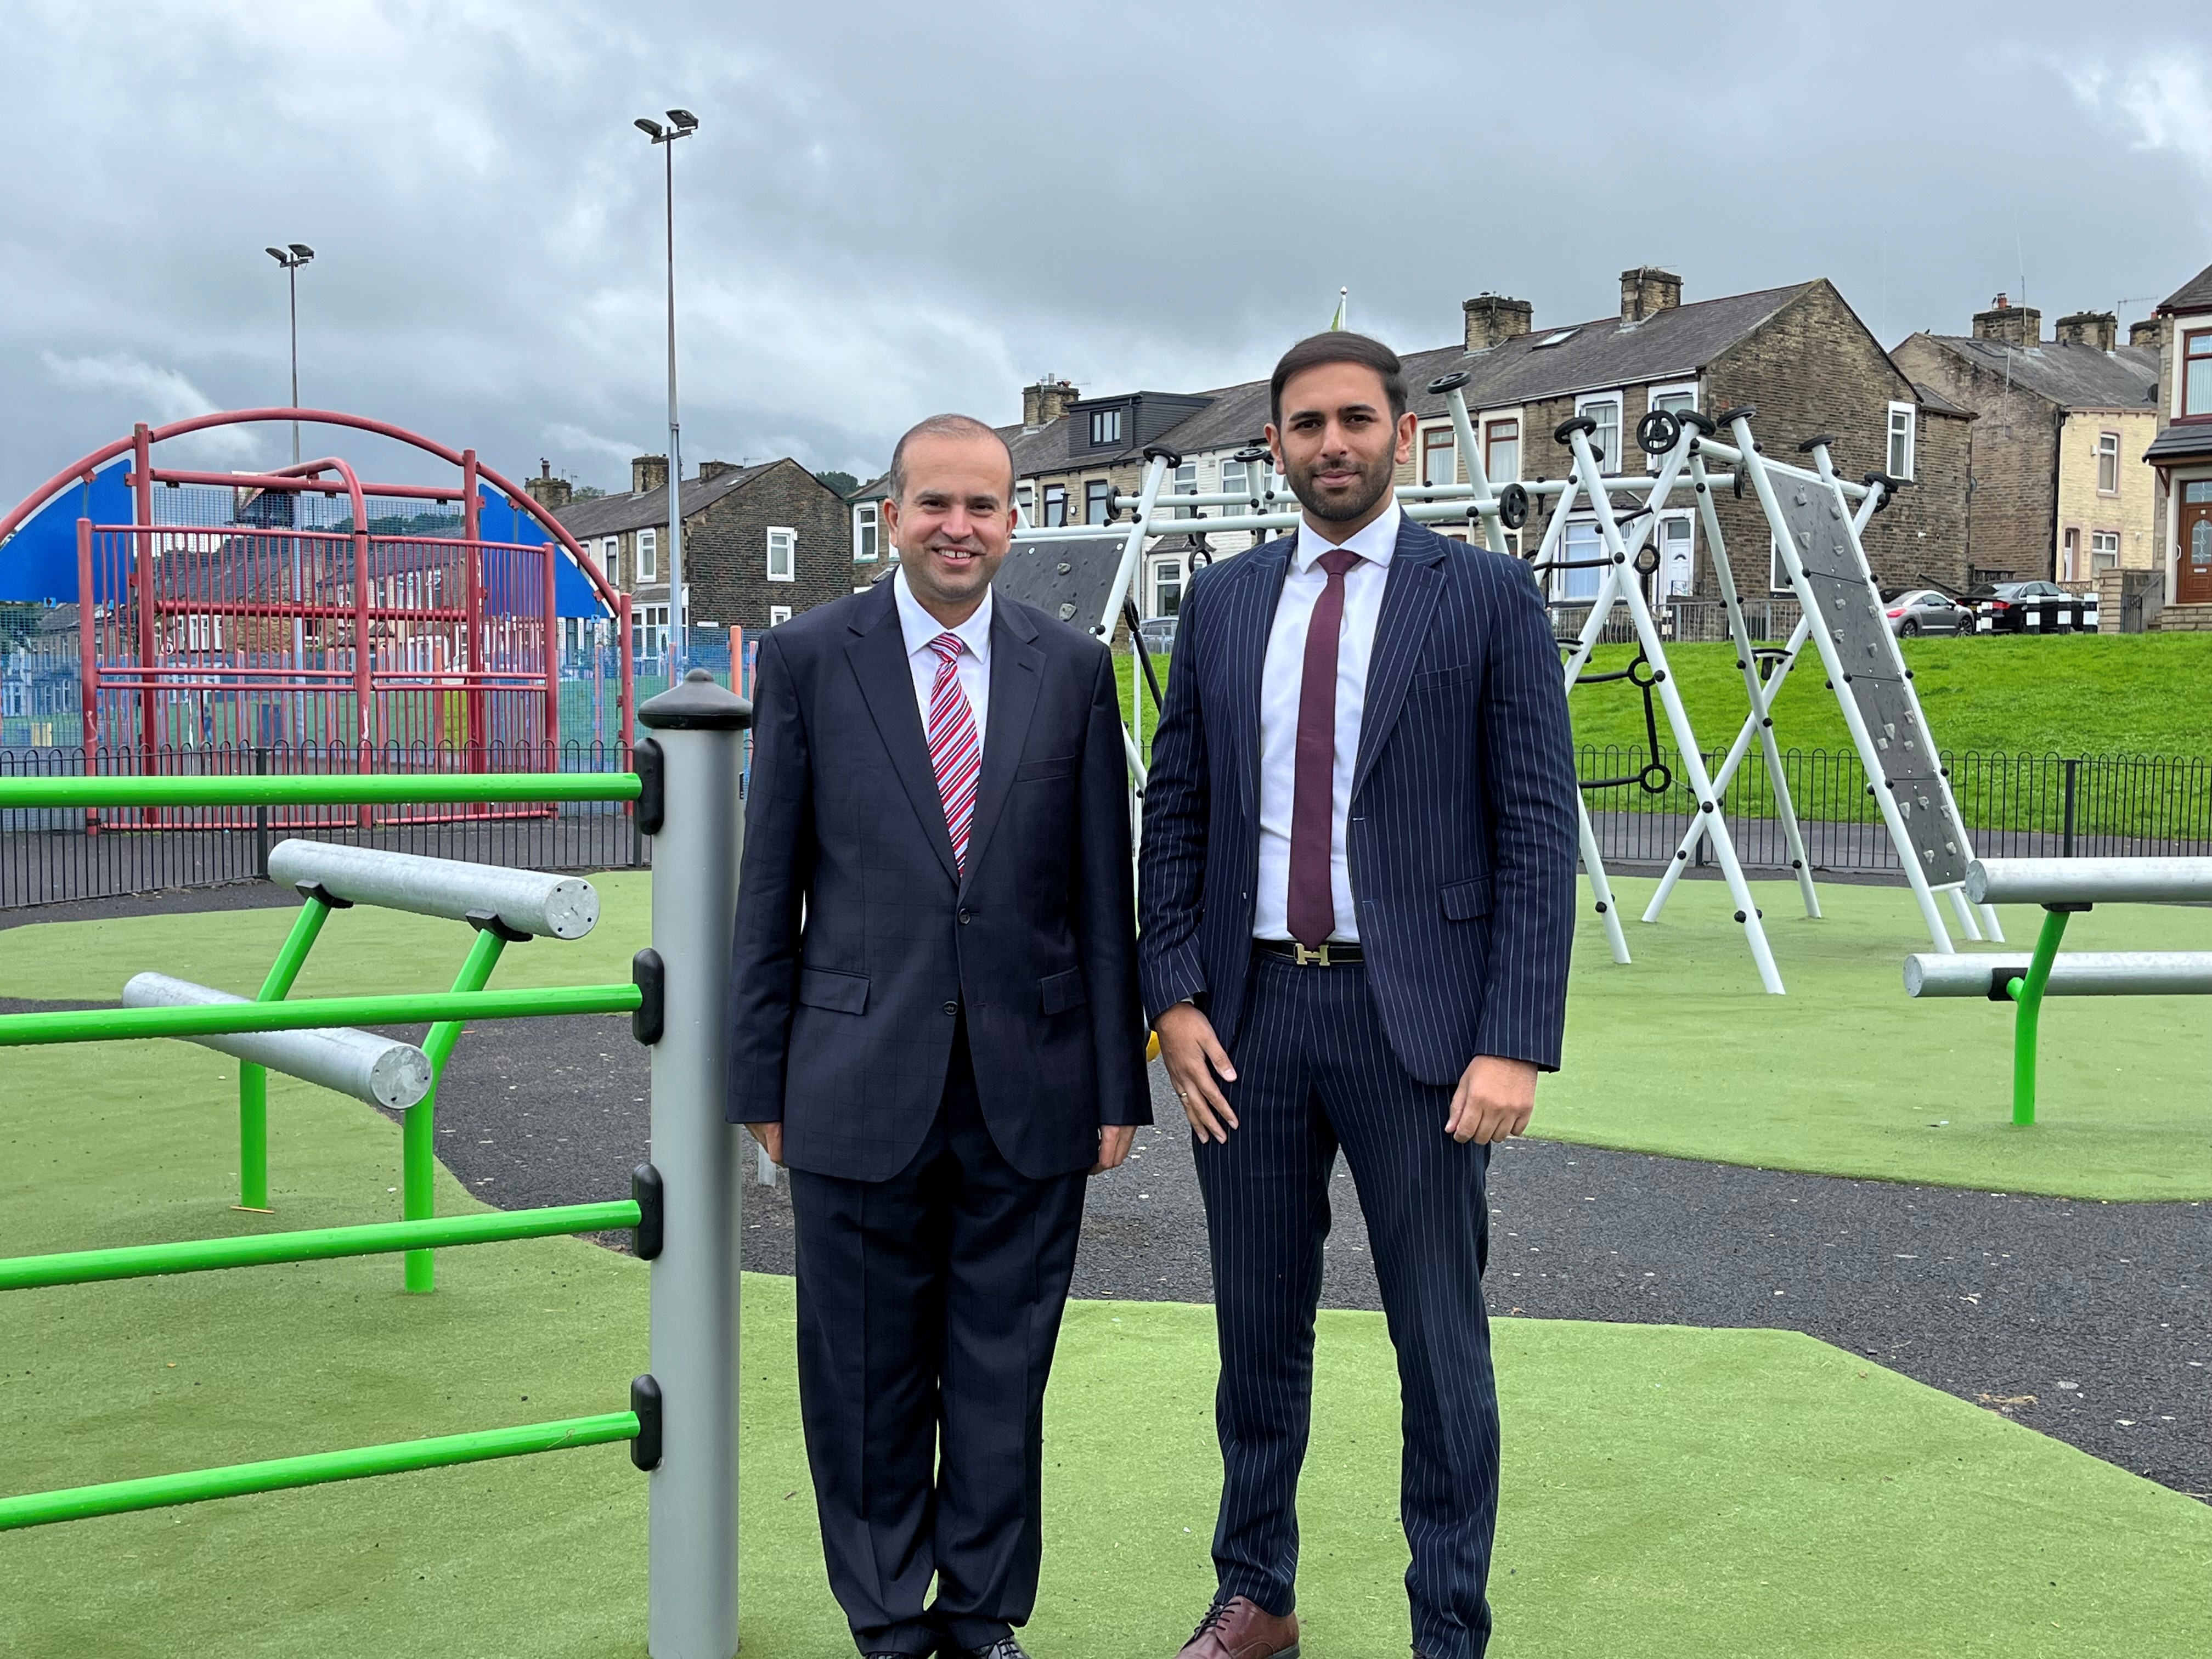 A new playground for teenagers has been completed at Walverden Park